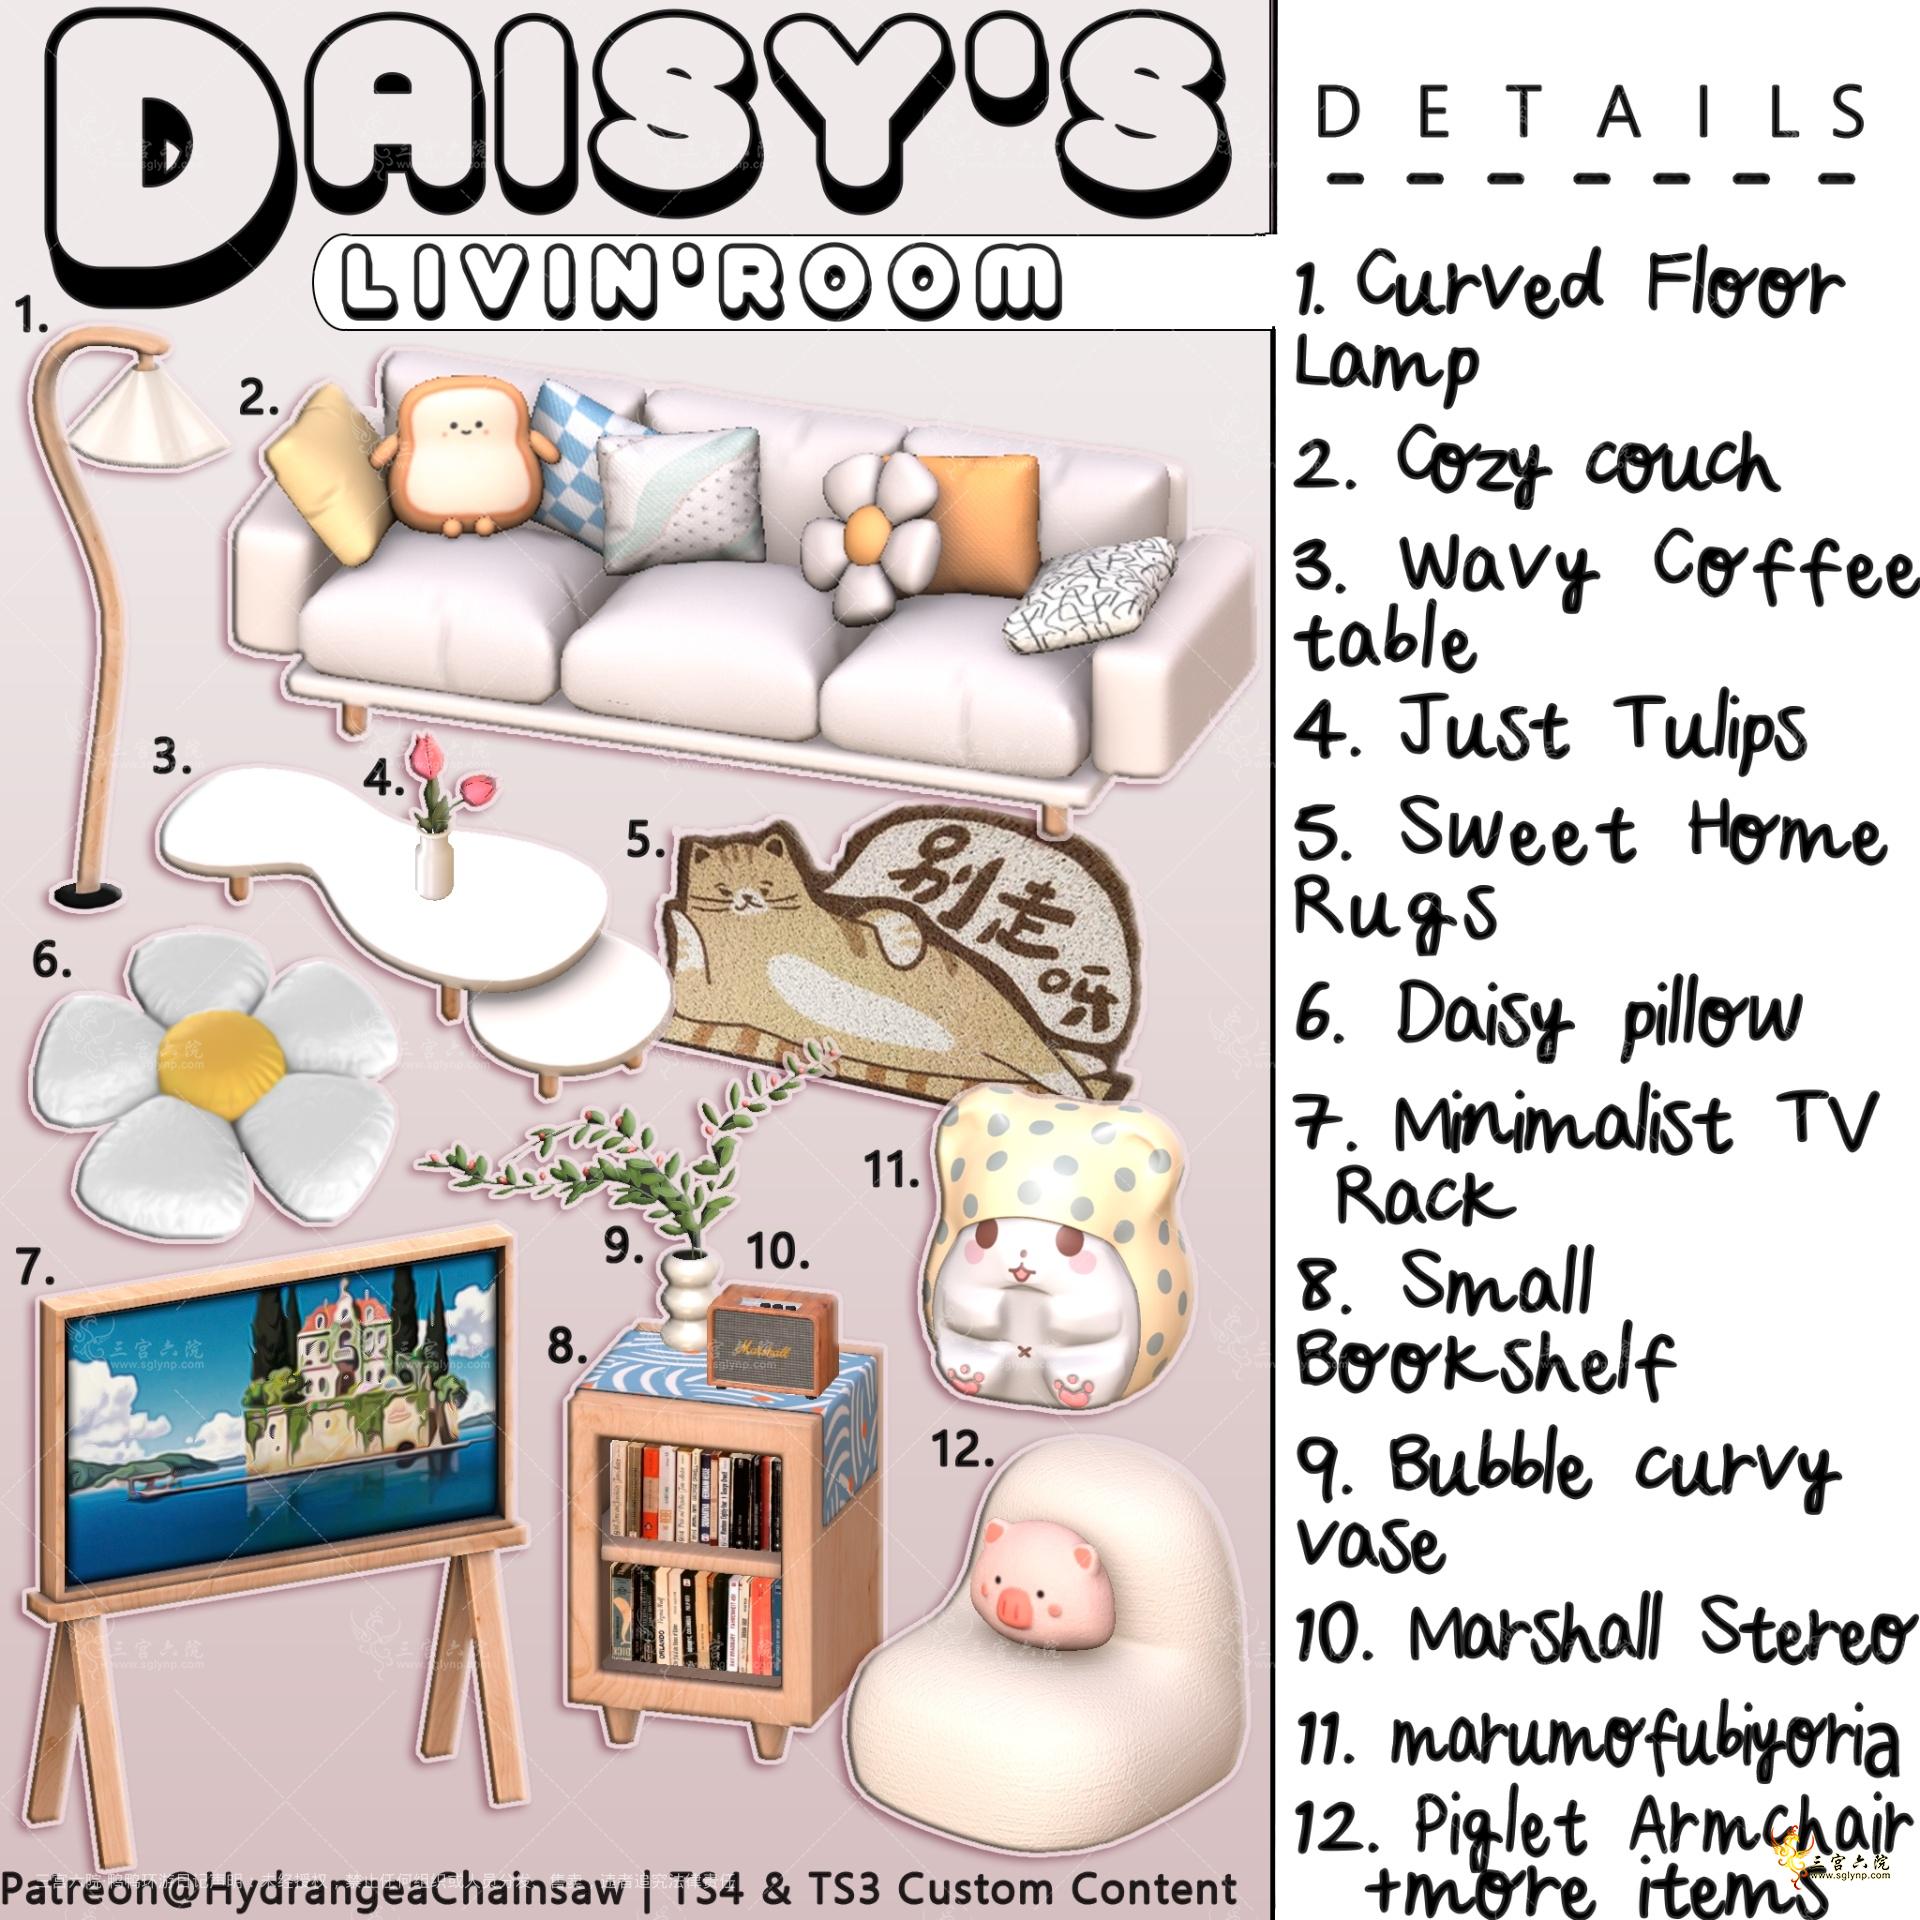 !daisys livinroom.png